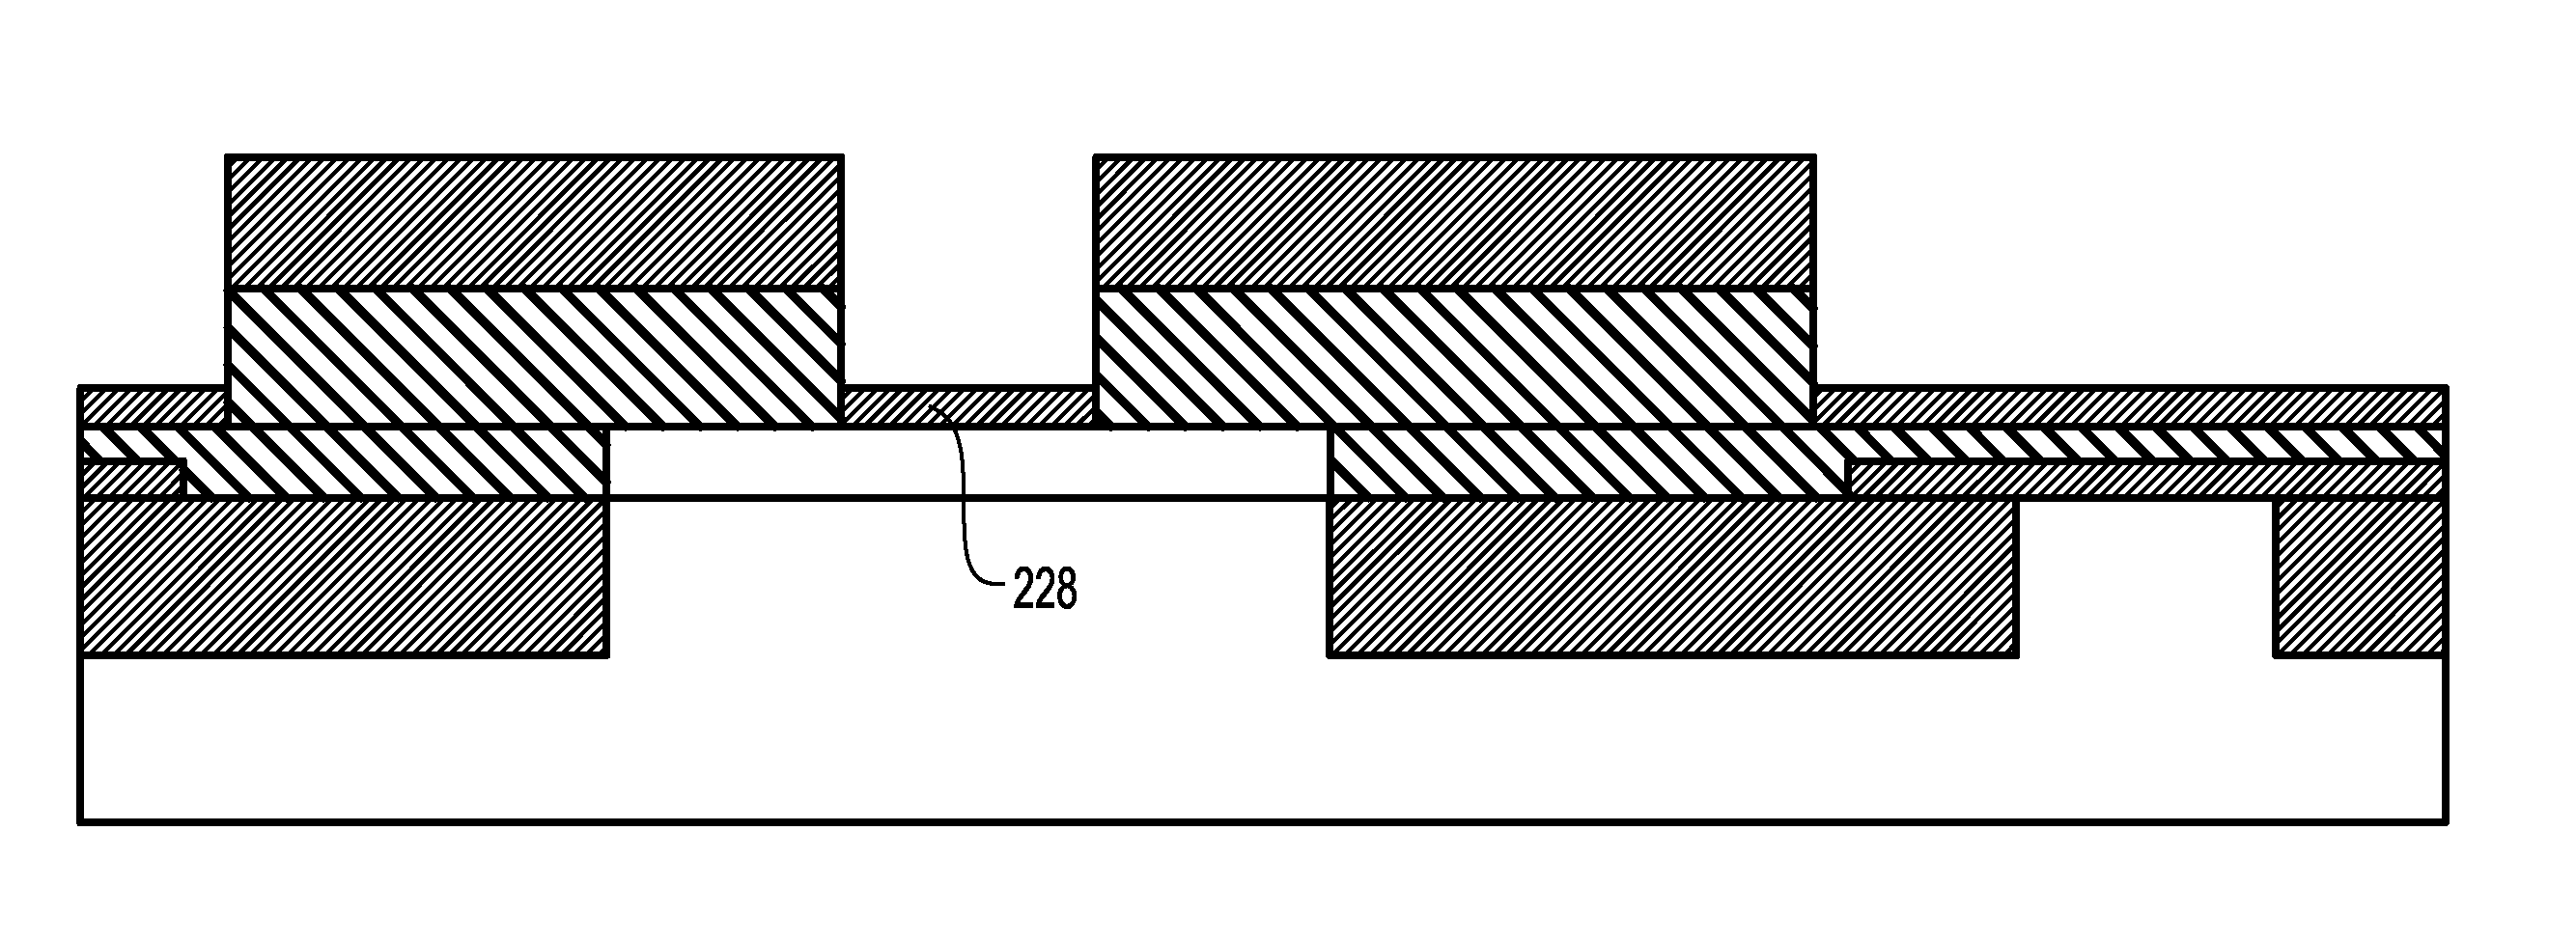 Methods of fabricating bipolar transistor for improved isolation, passivation and critical dimension control